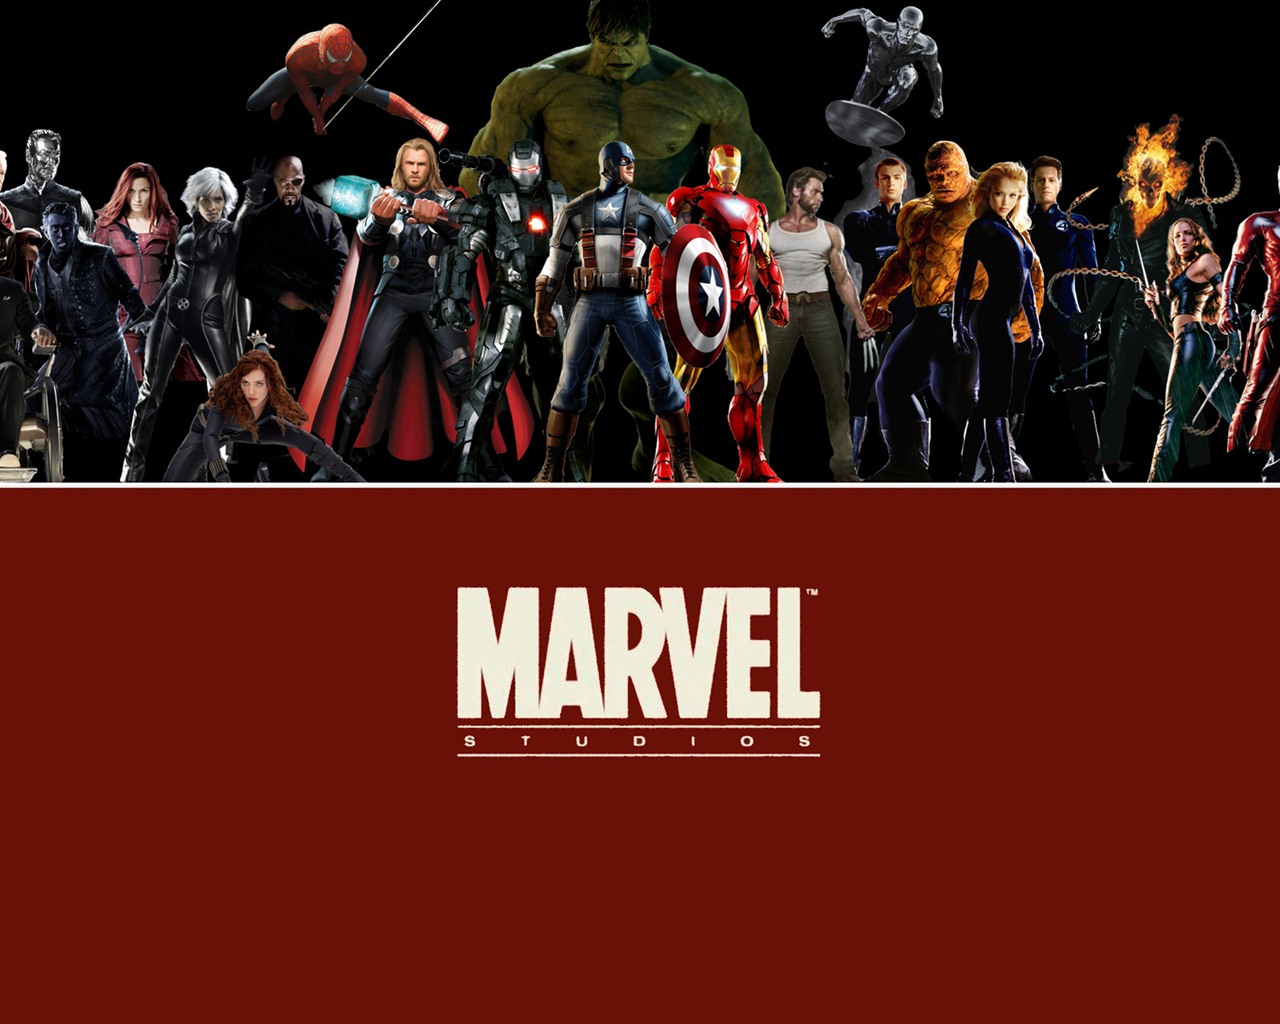 The Avengers 2012 HD wallpapers #8 - 1280x1024